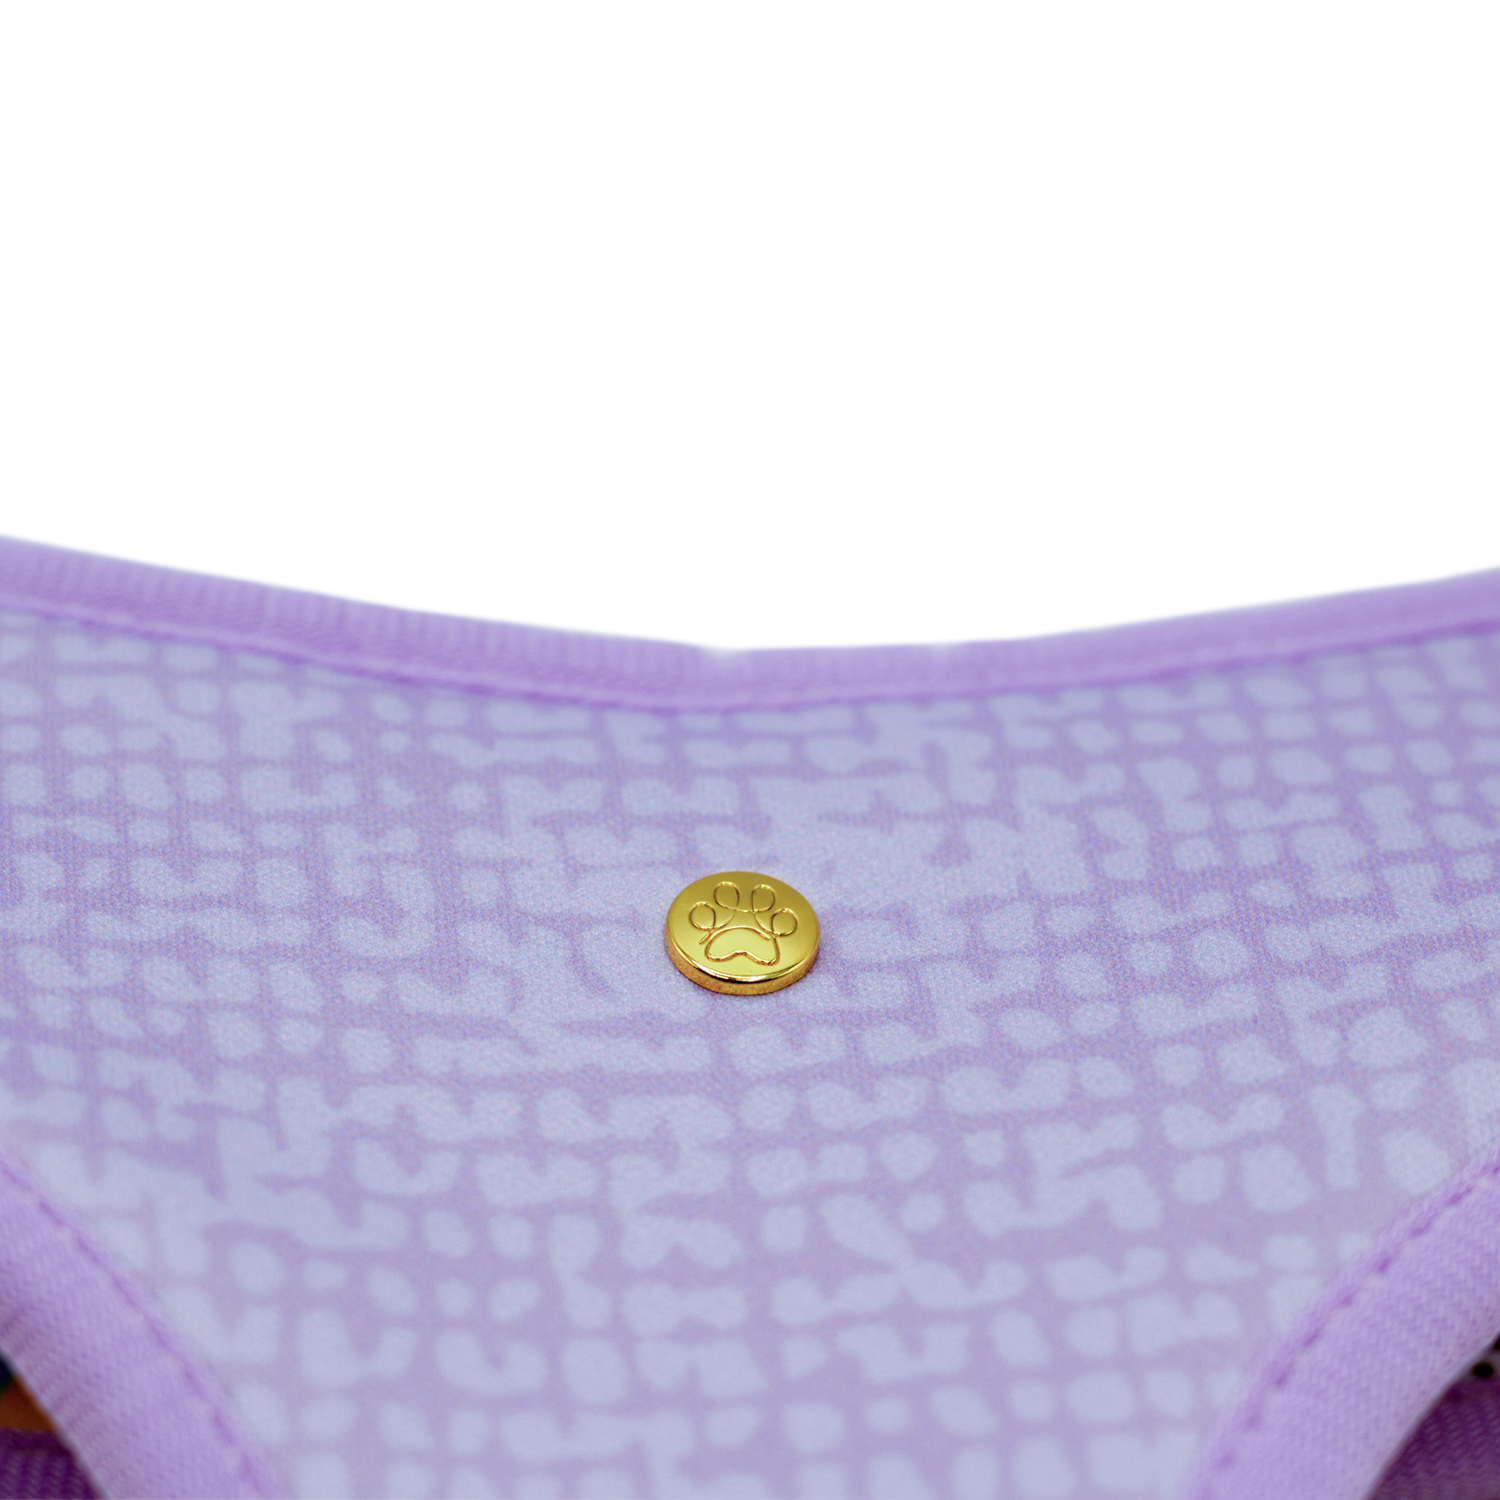 Pata Paw toucan tropics reversible harness showing a close-up of its golden paw and a timeless and chic texture pattern in lilac.